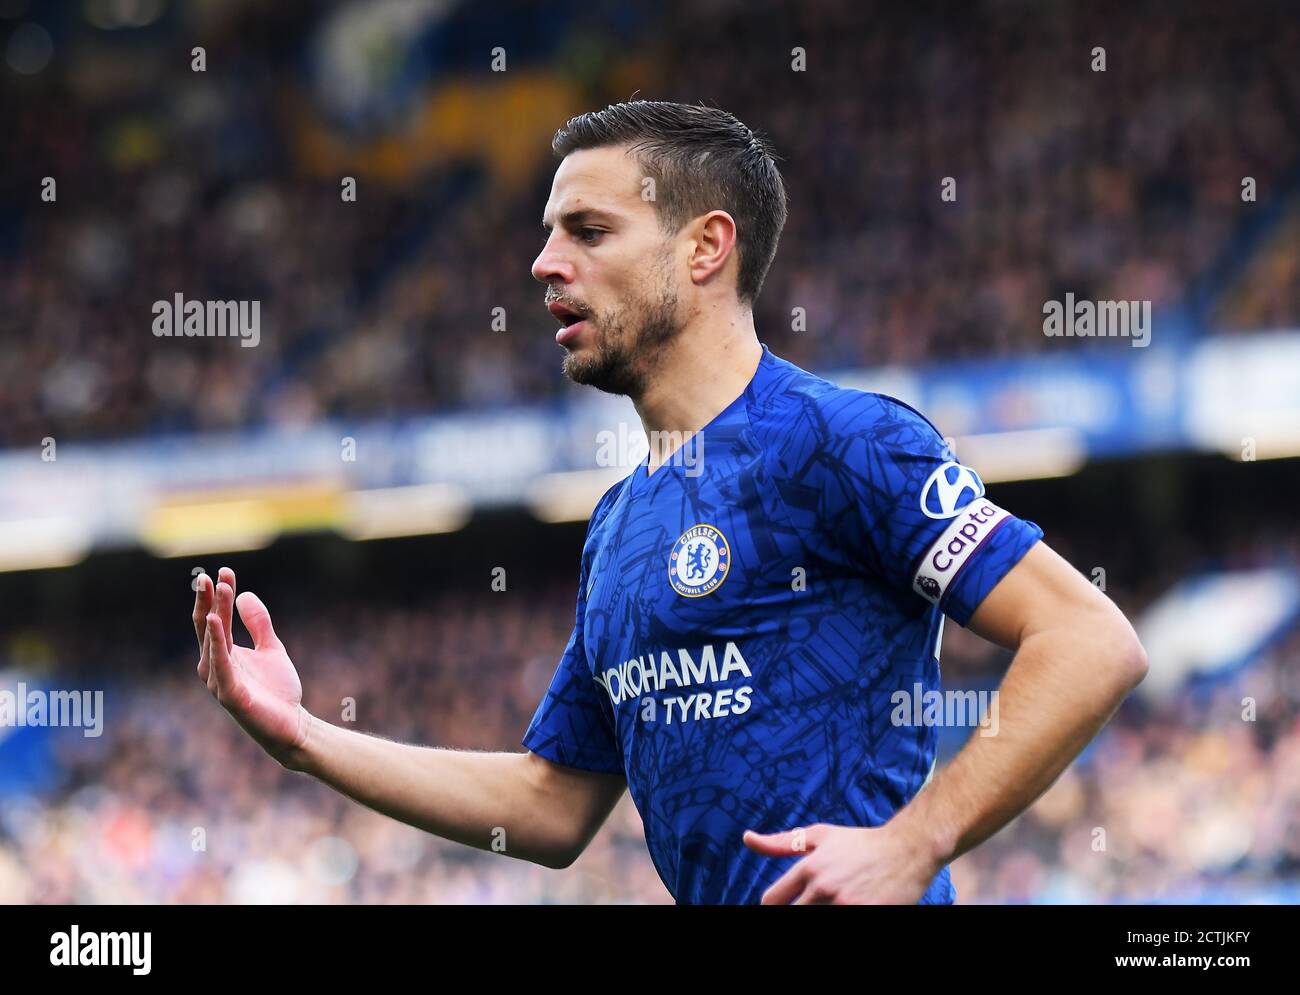 LONDON, ENGLAND - FEBRUARY 22, 2020: Cesar Azpilicueta of Chelsea pictured during the 2019/20 Premier League game between Chelsea FC and Tottenham Hotspur FC at Stamford Bridge. Stock Photo